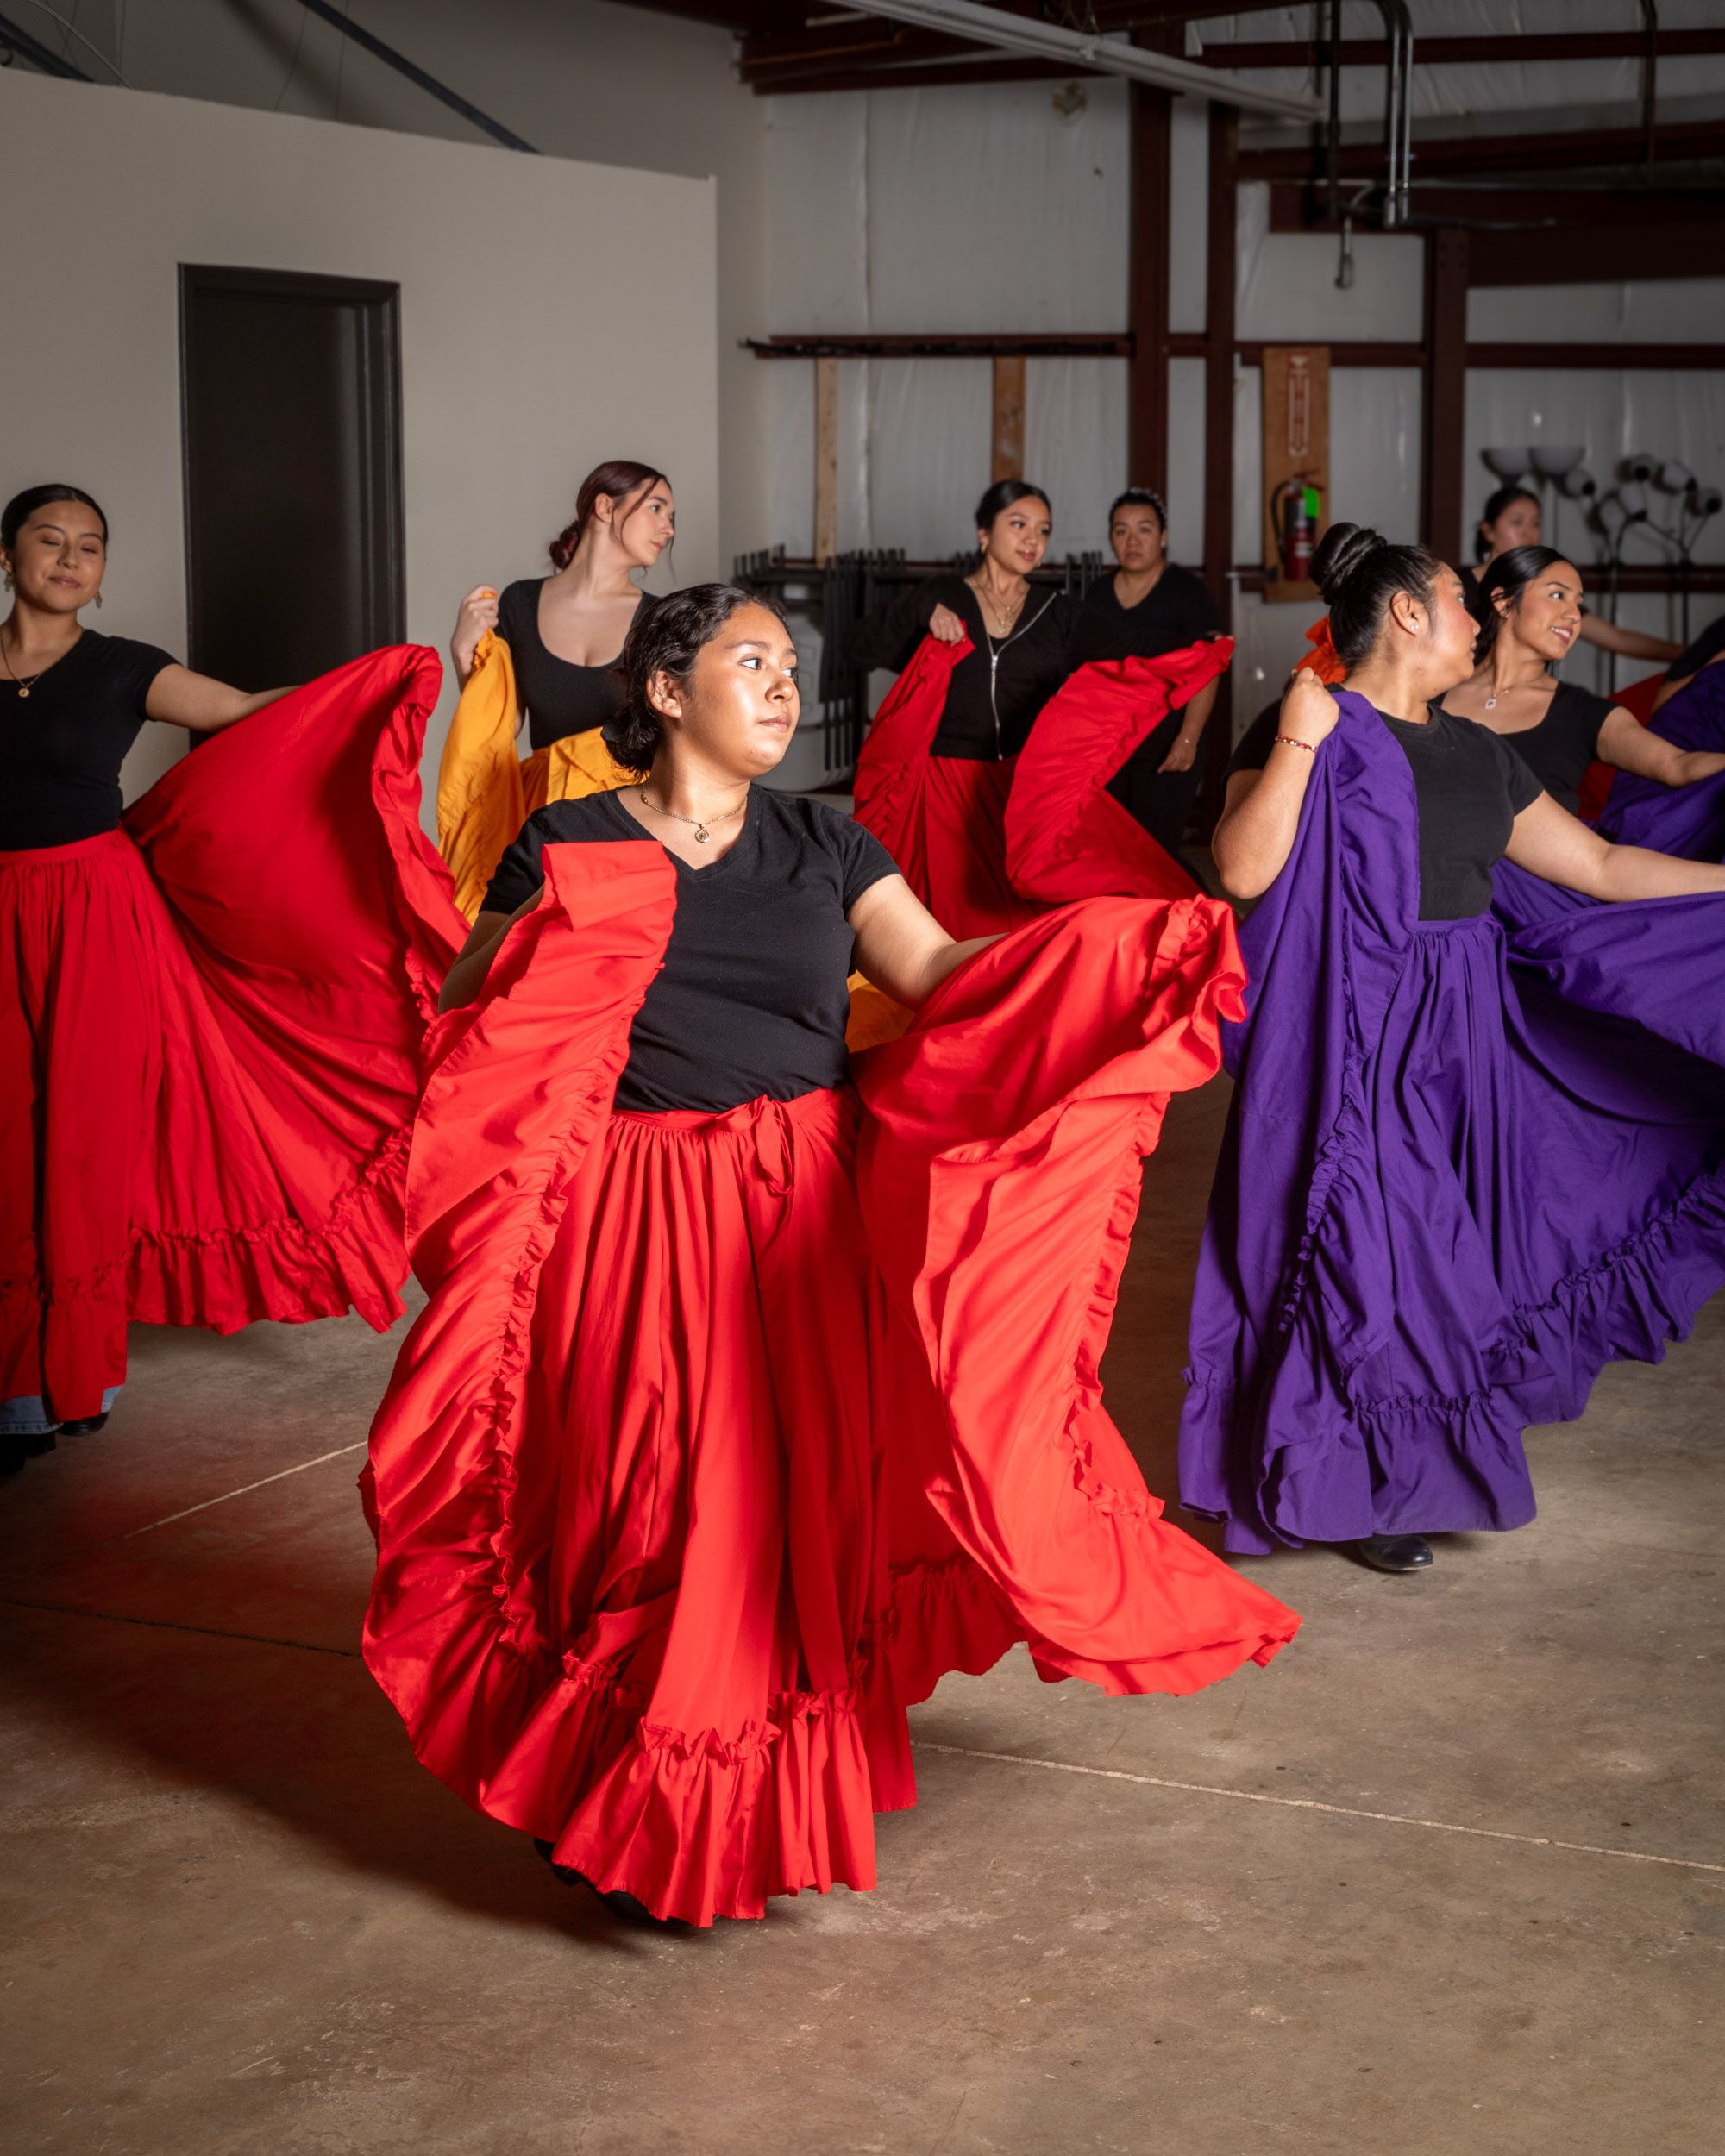 In a rehearsal space, there are young girls dancing with large colorful long skirts in red, purple, and orange colors.